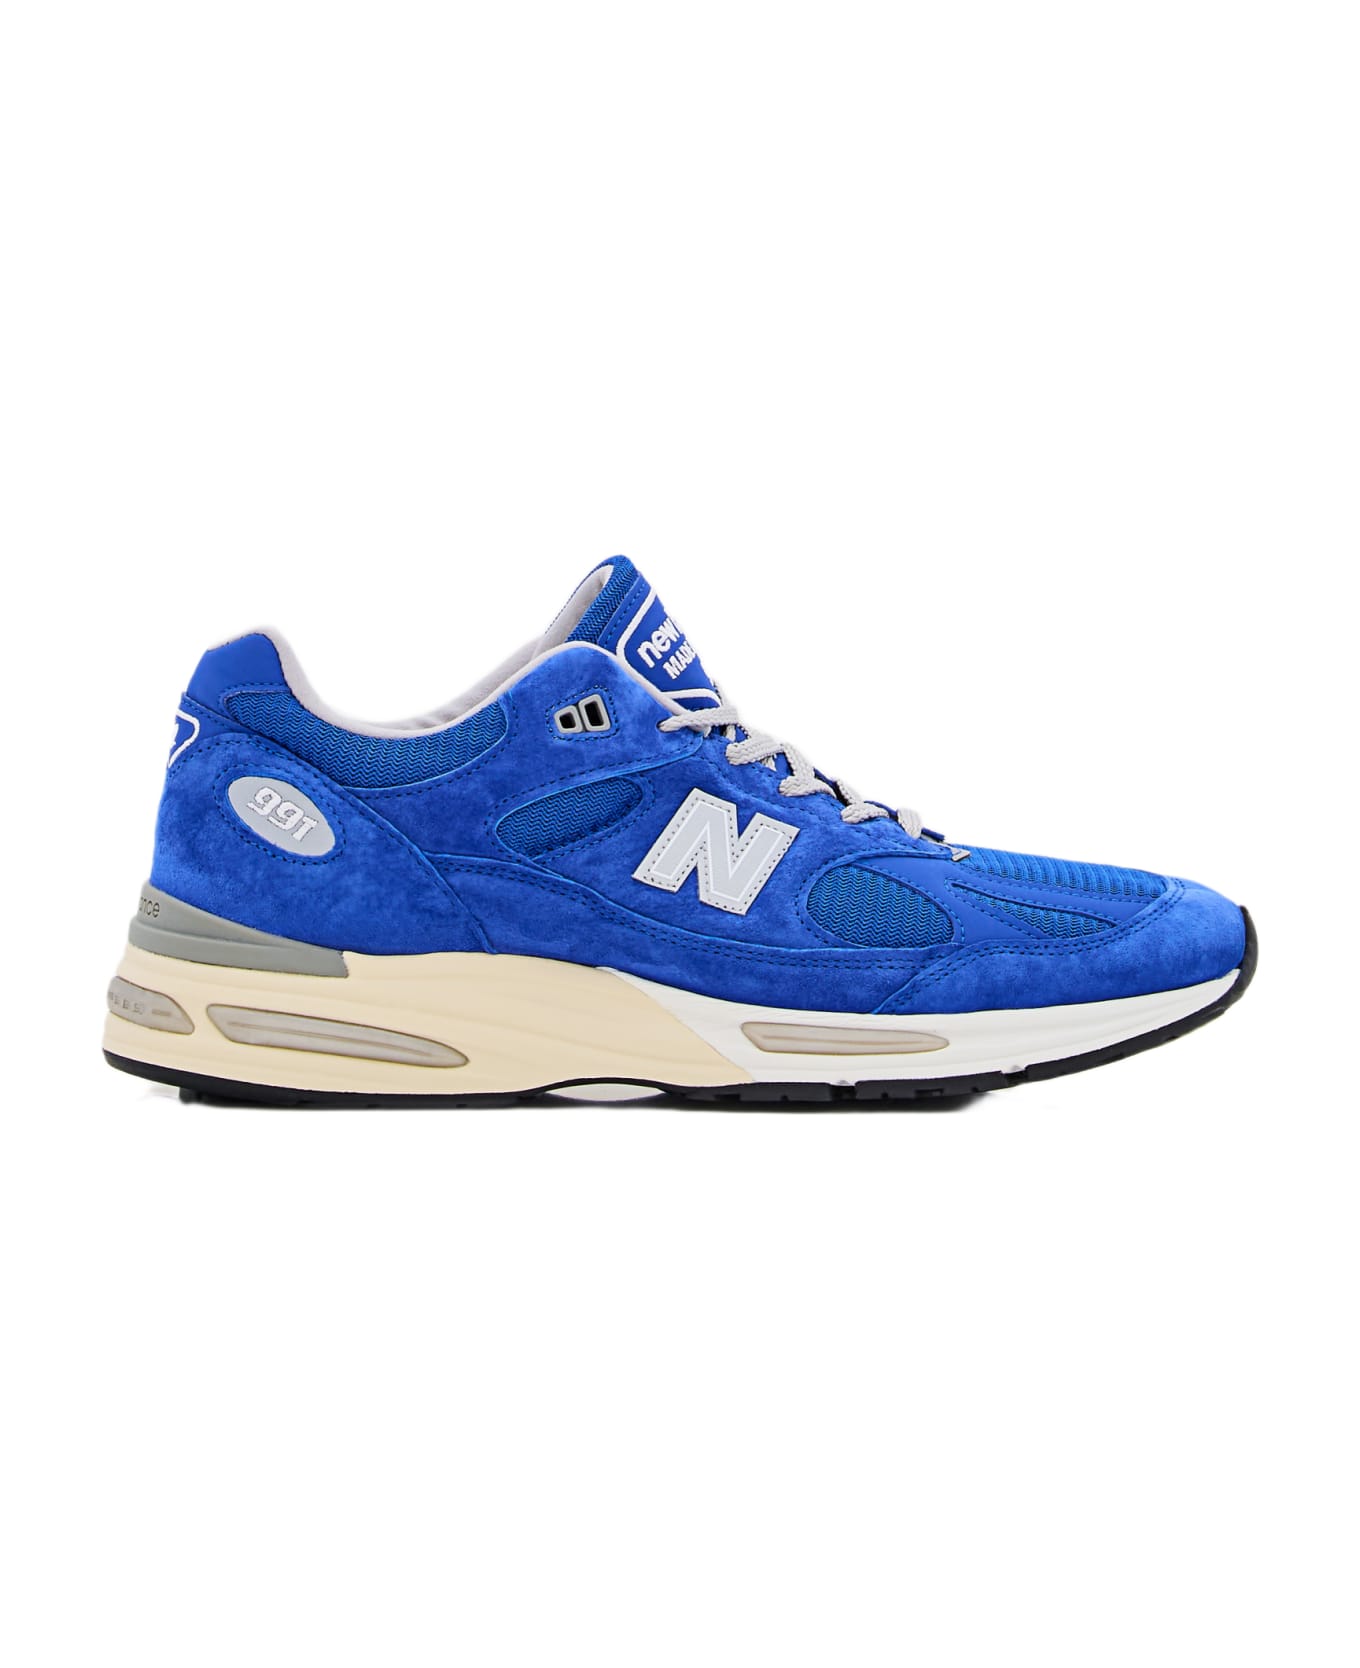 New Balance 991 Sneakers Made In Uk - Blue スニーカー